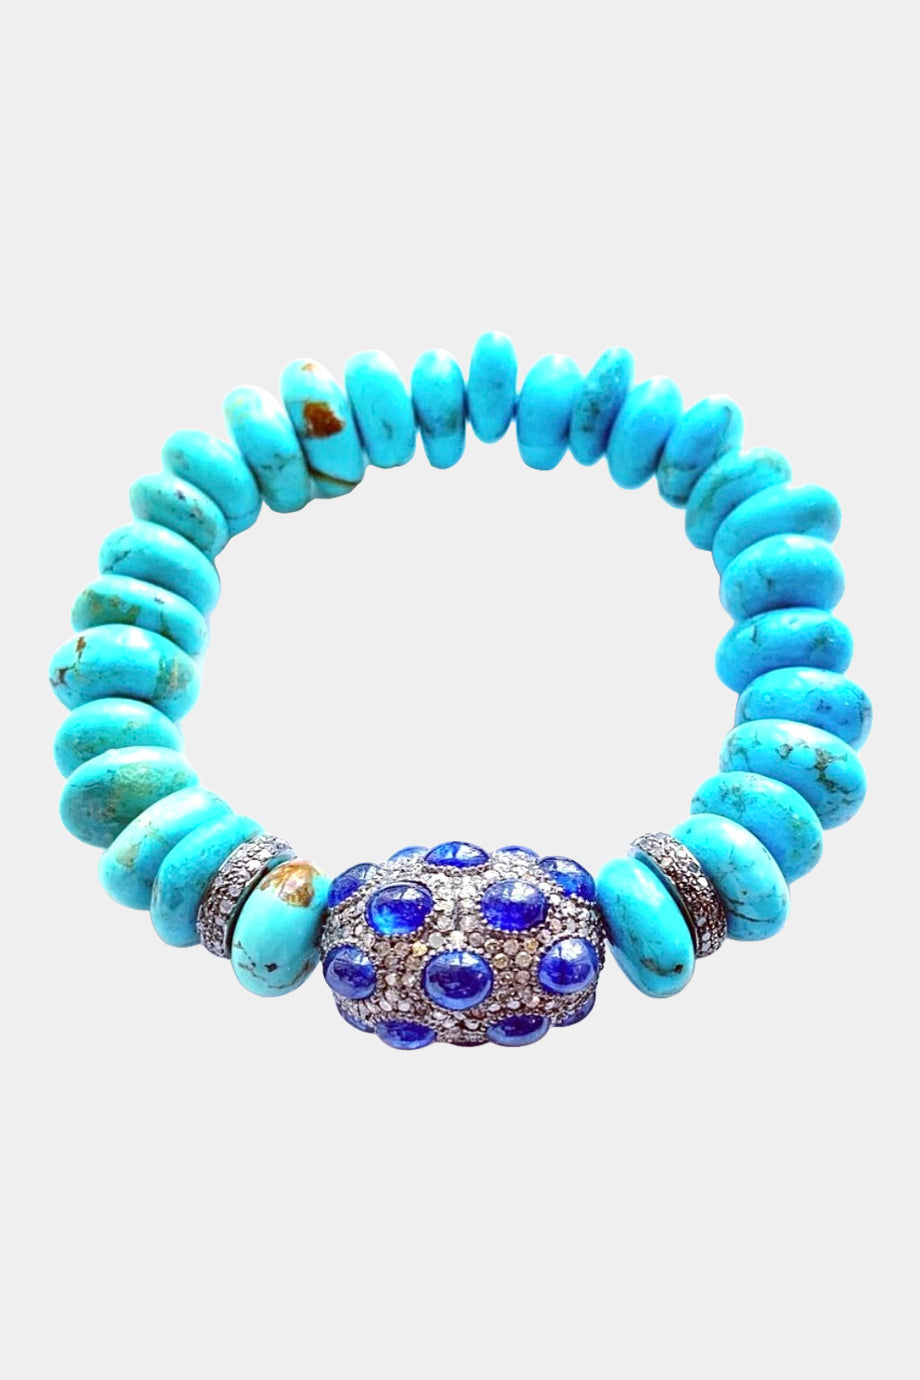 Turquoise Stretch Bracelet with a Diamond and Sapphire Charm